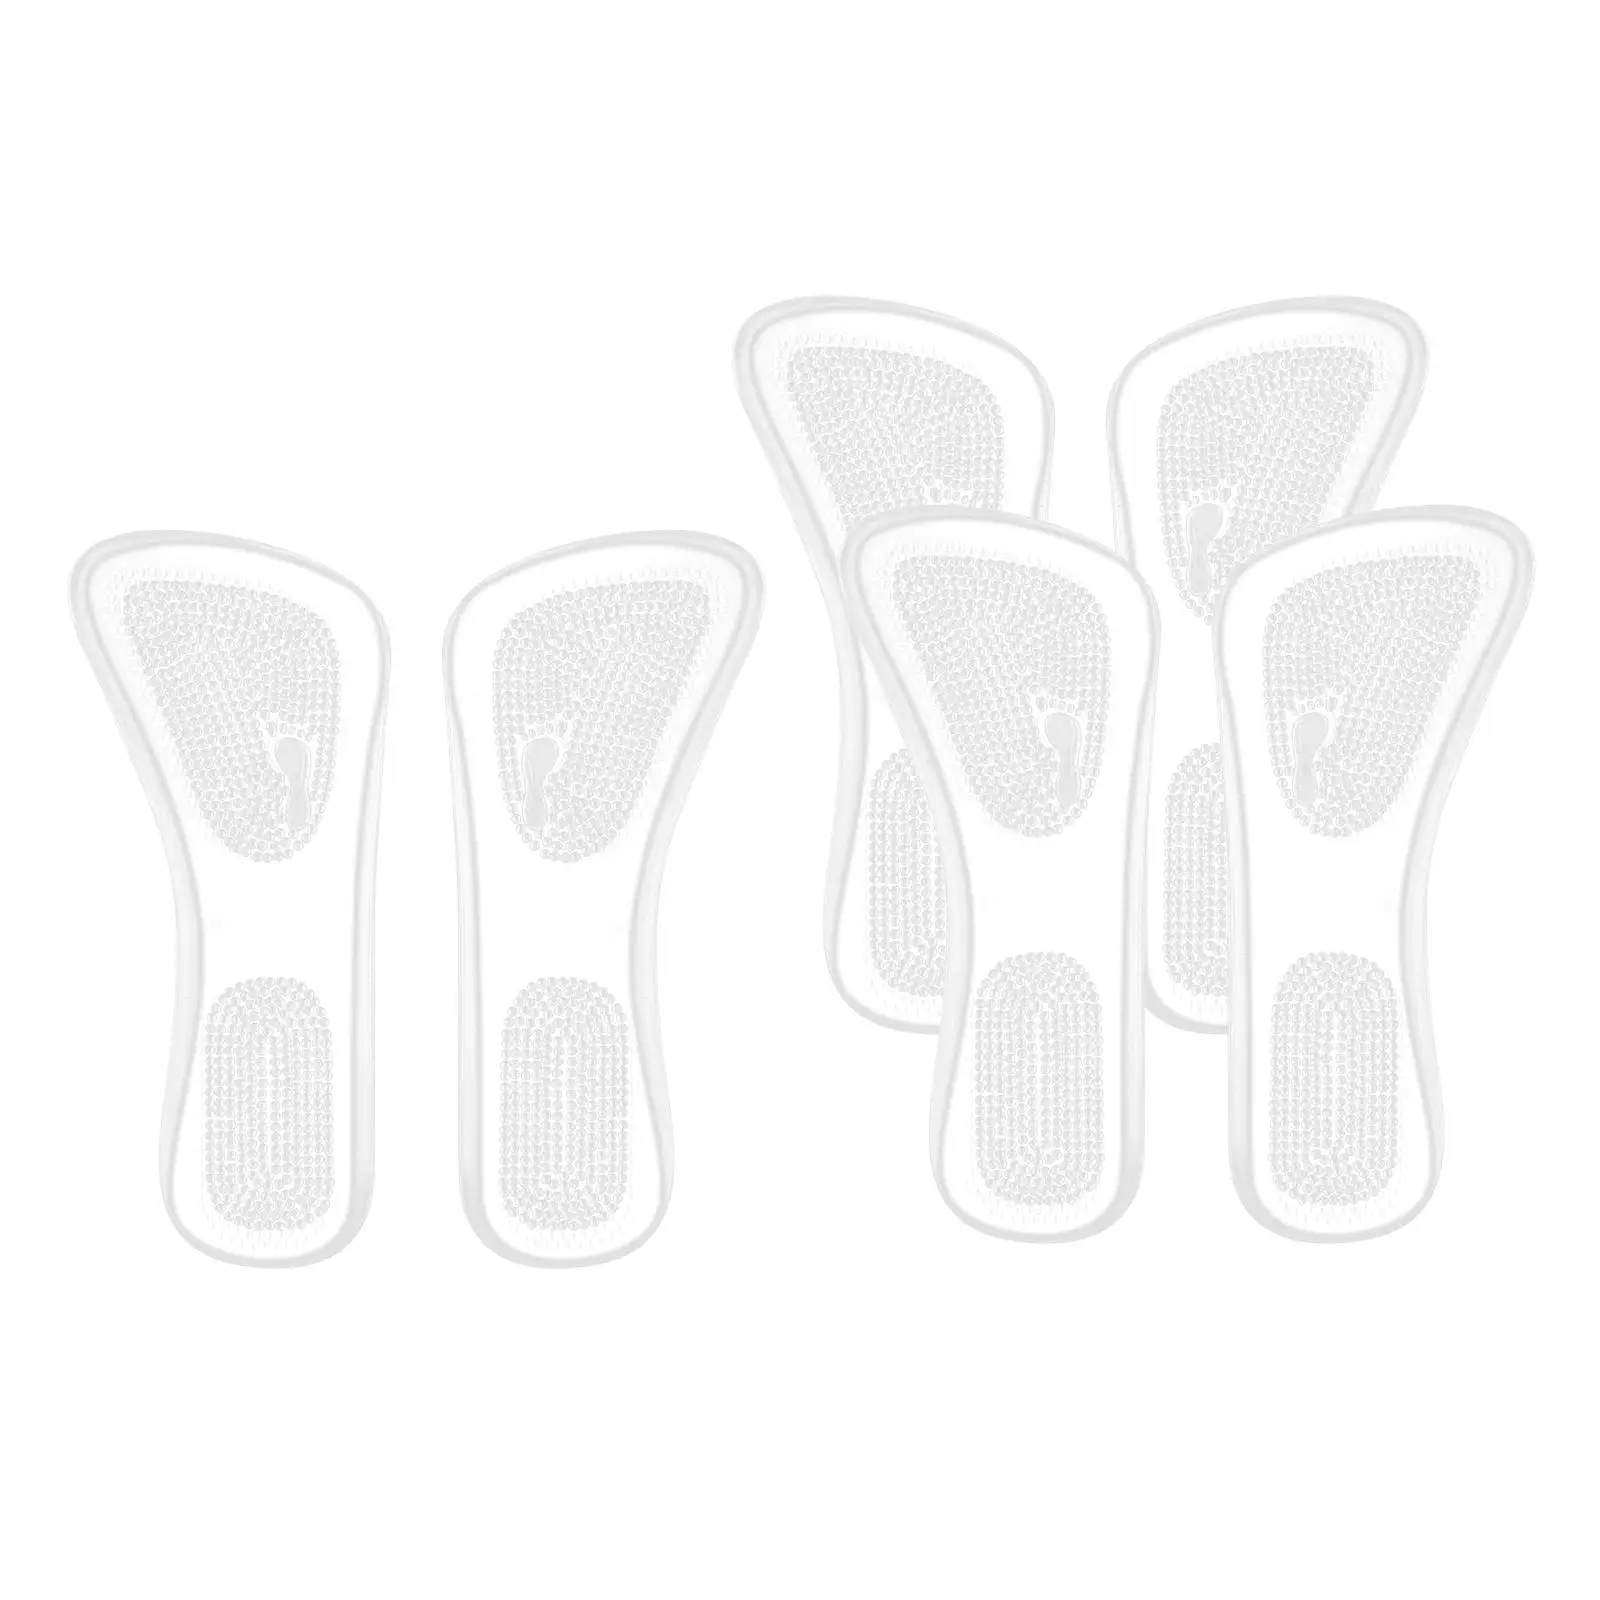 Transparent High Heel Insoles 3/4 Length Washable Shock Absorption Heel Cushion Inserts for Walking Shoes Sandals Boots